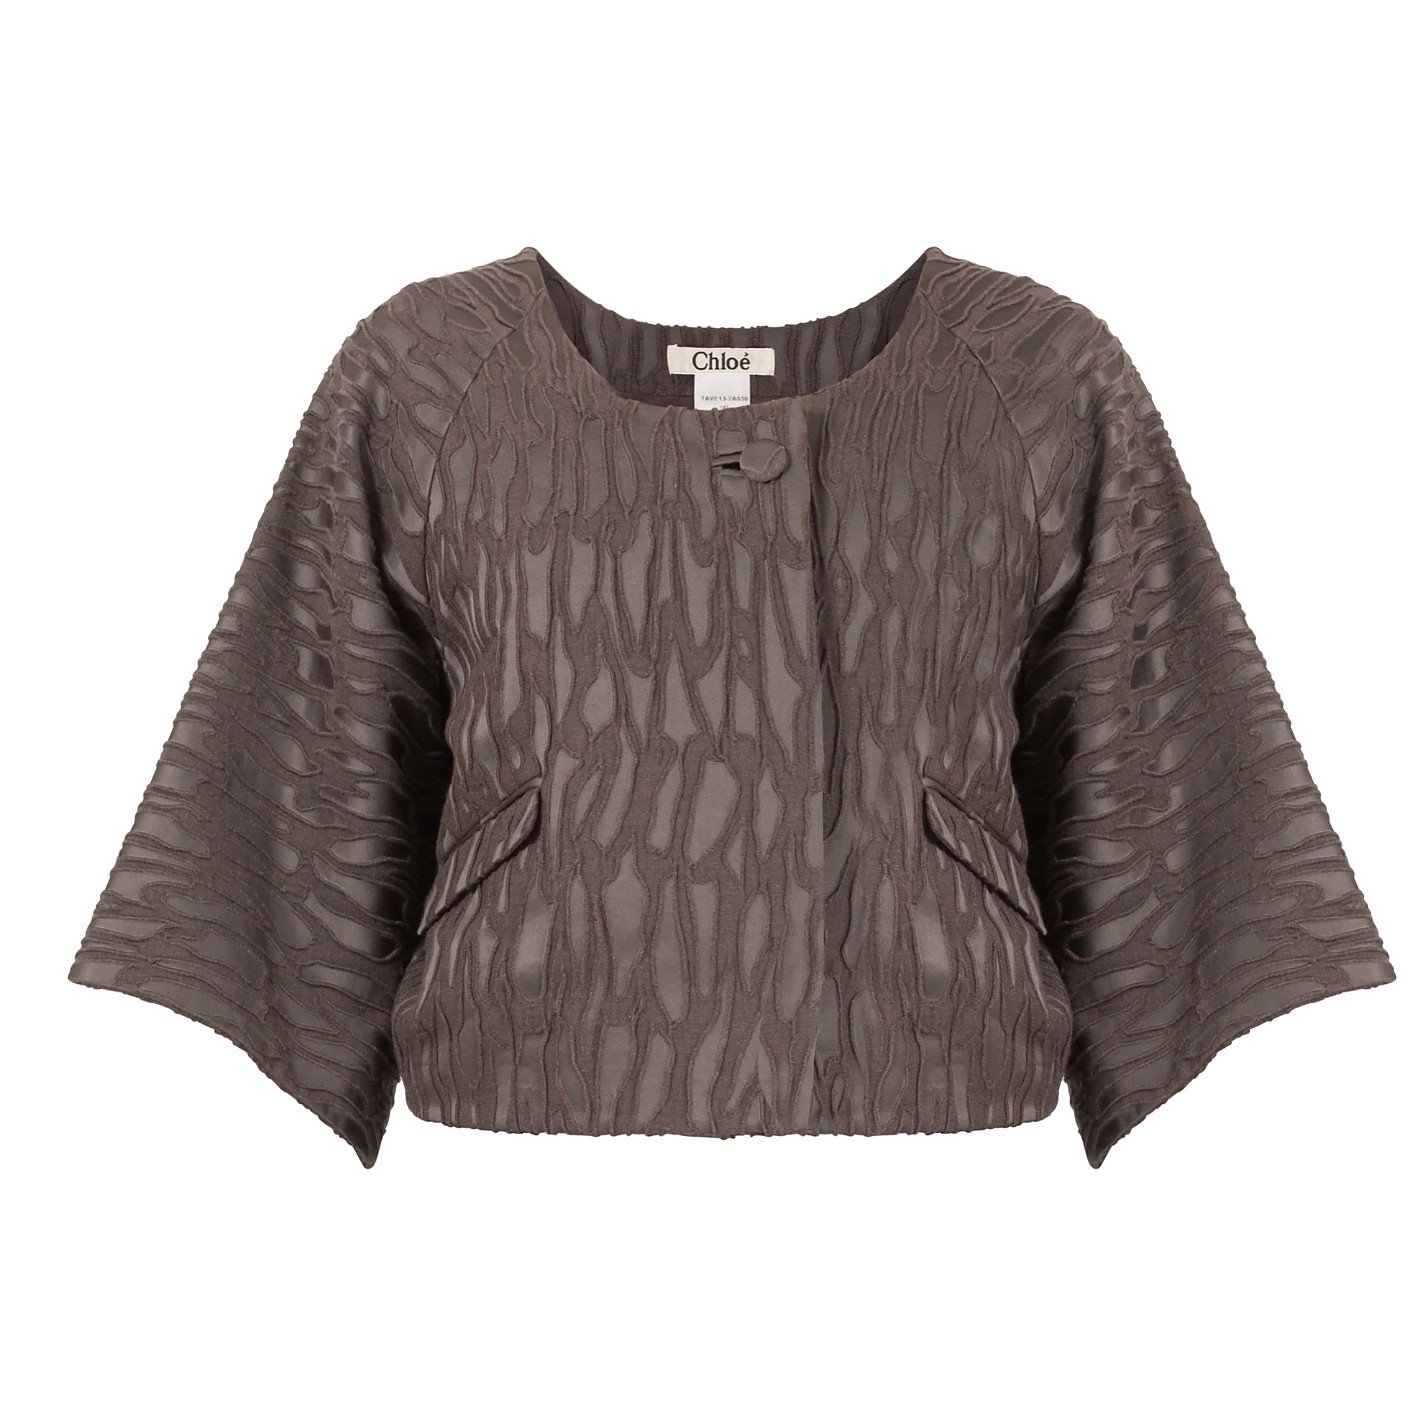 Chloé Textured Cropped Jacket